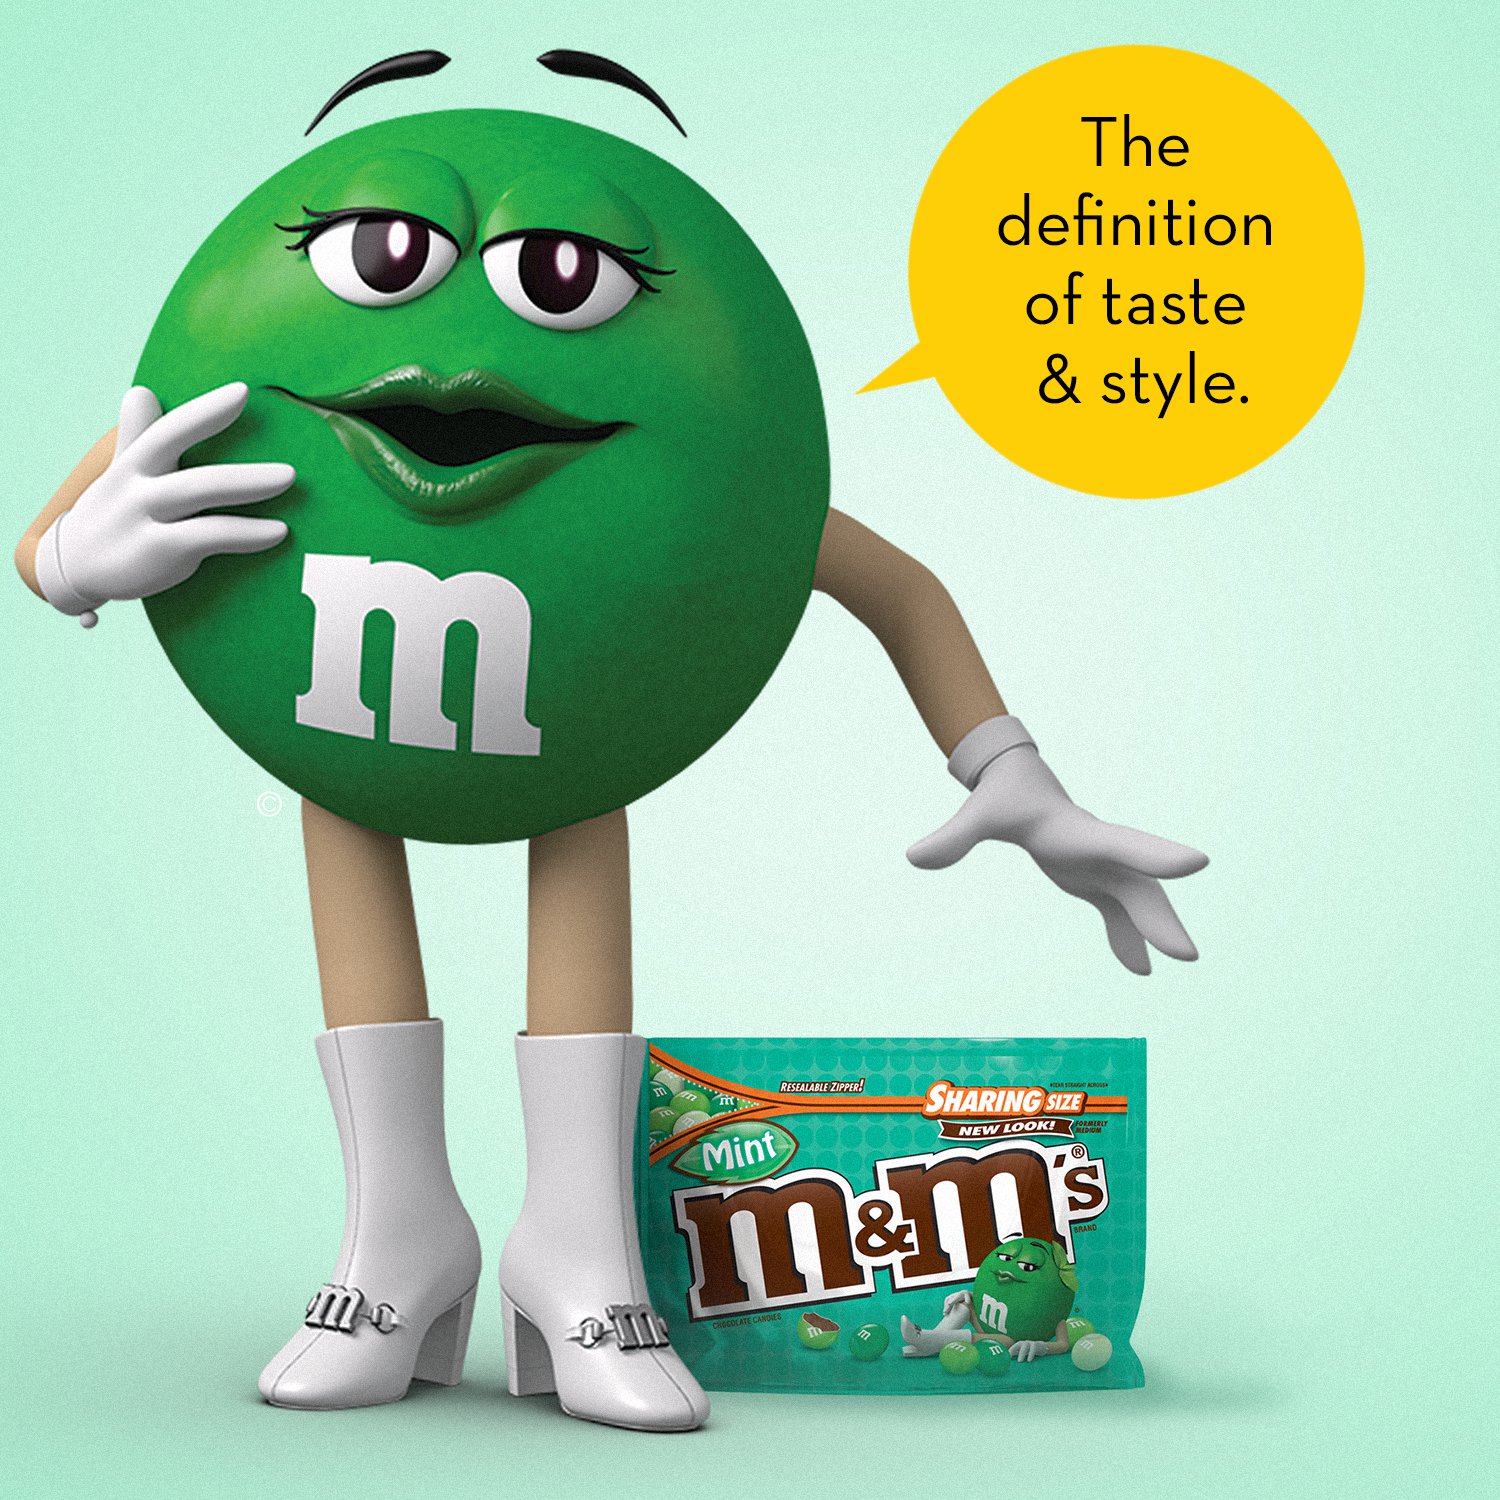 M&M's Dark Chocolate Mint Candy, Sharing Size - 9.6 oz Bag - image 5 of 7